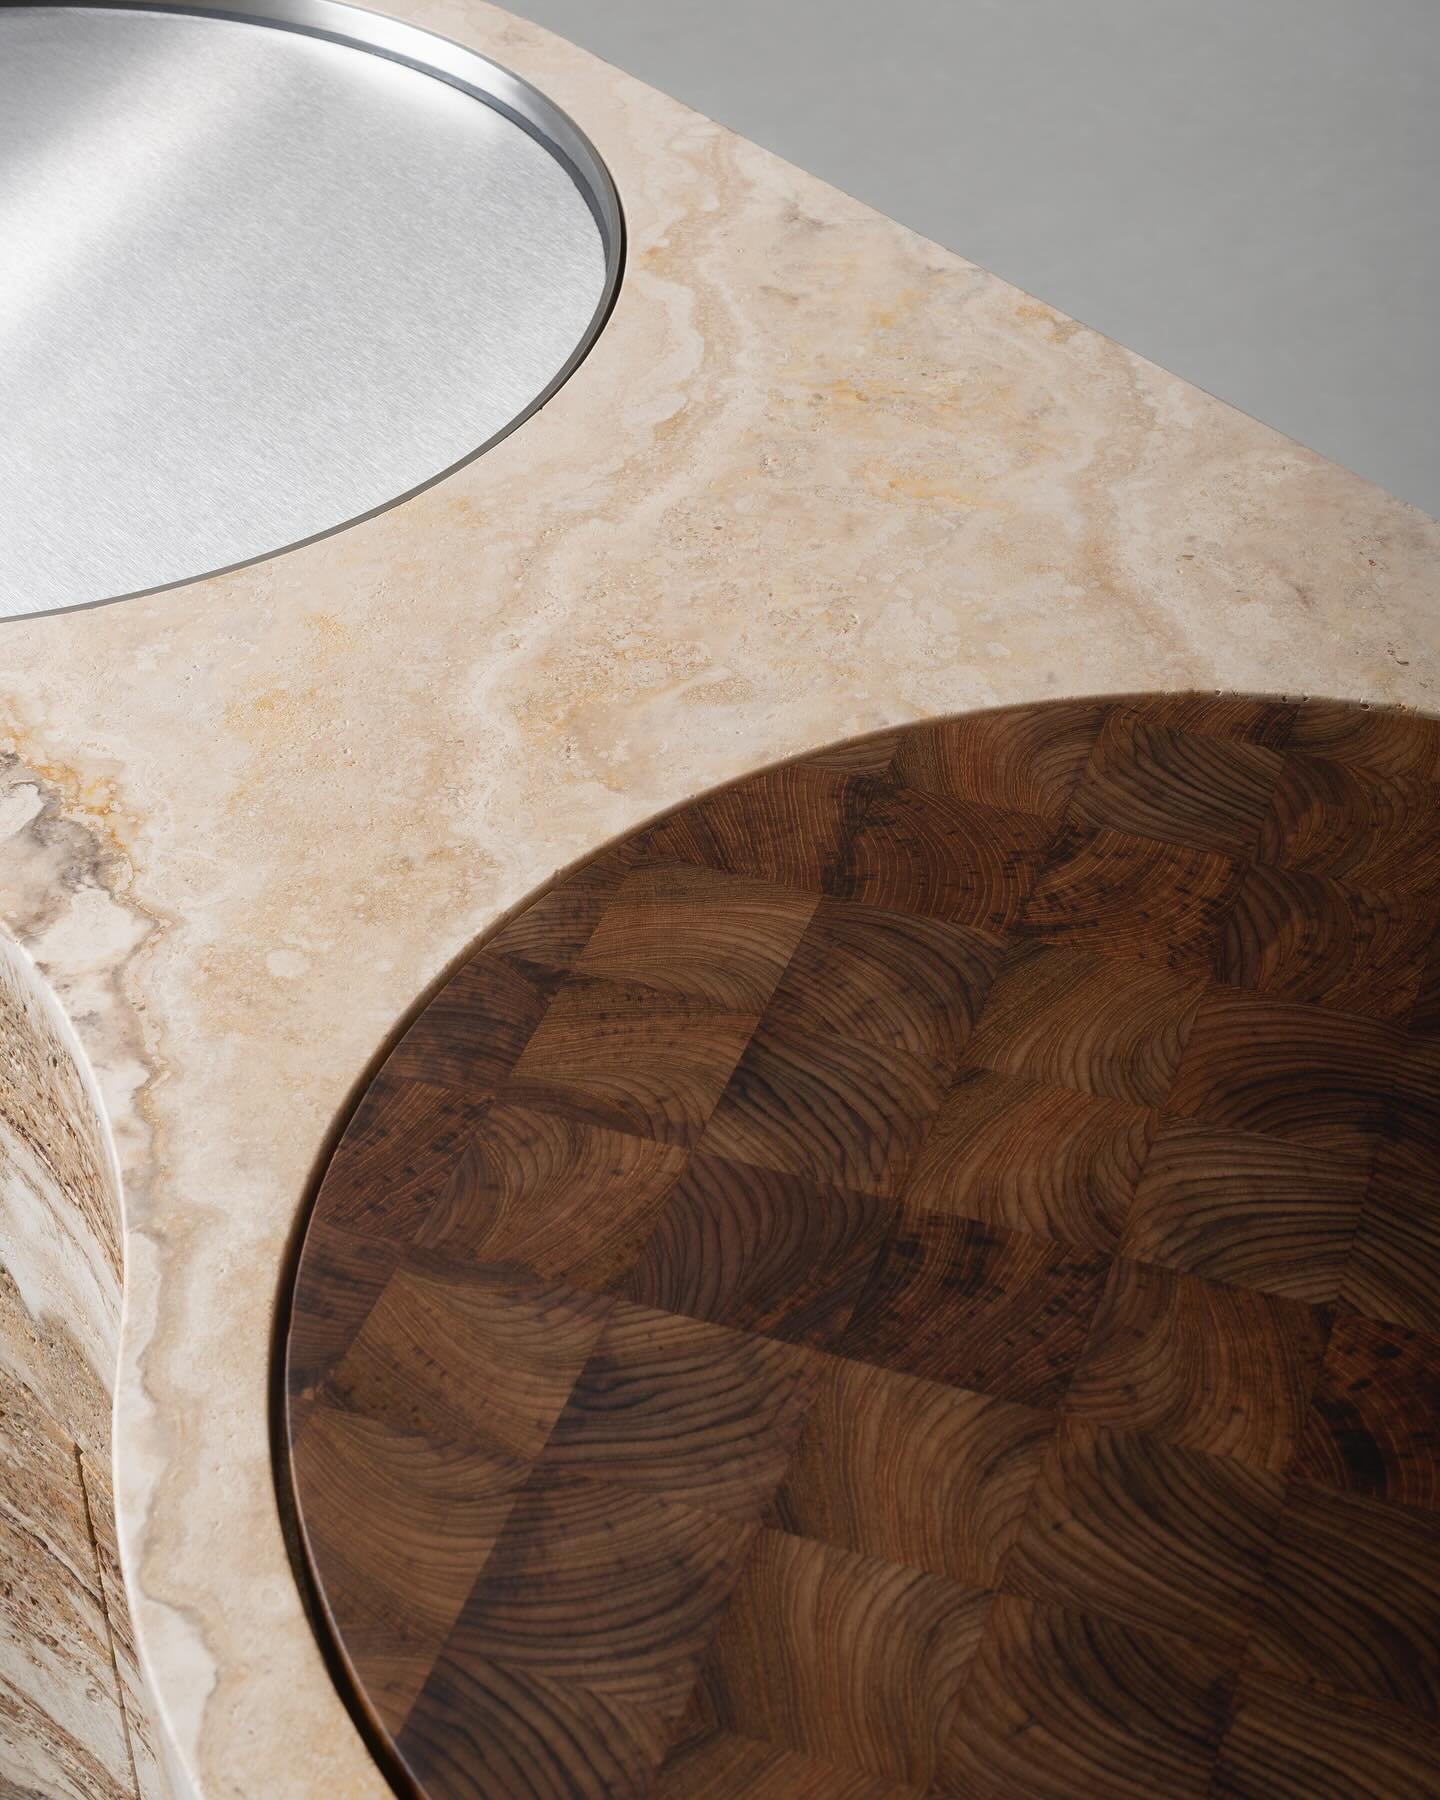 The semicircular JUNE design, carved with soft, curved lines, is formed around the user to create a seamless and edgeless kitchen workspace. This piece is completed in Tuscan Travertine. 

Designed + crafted by @vaselli_marmi and @kensakuoshiro 

#st